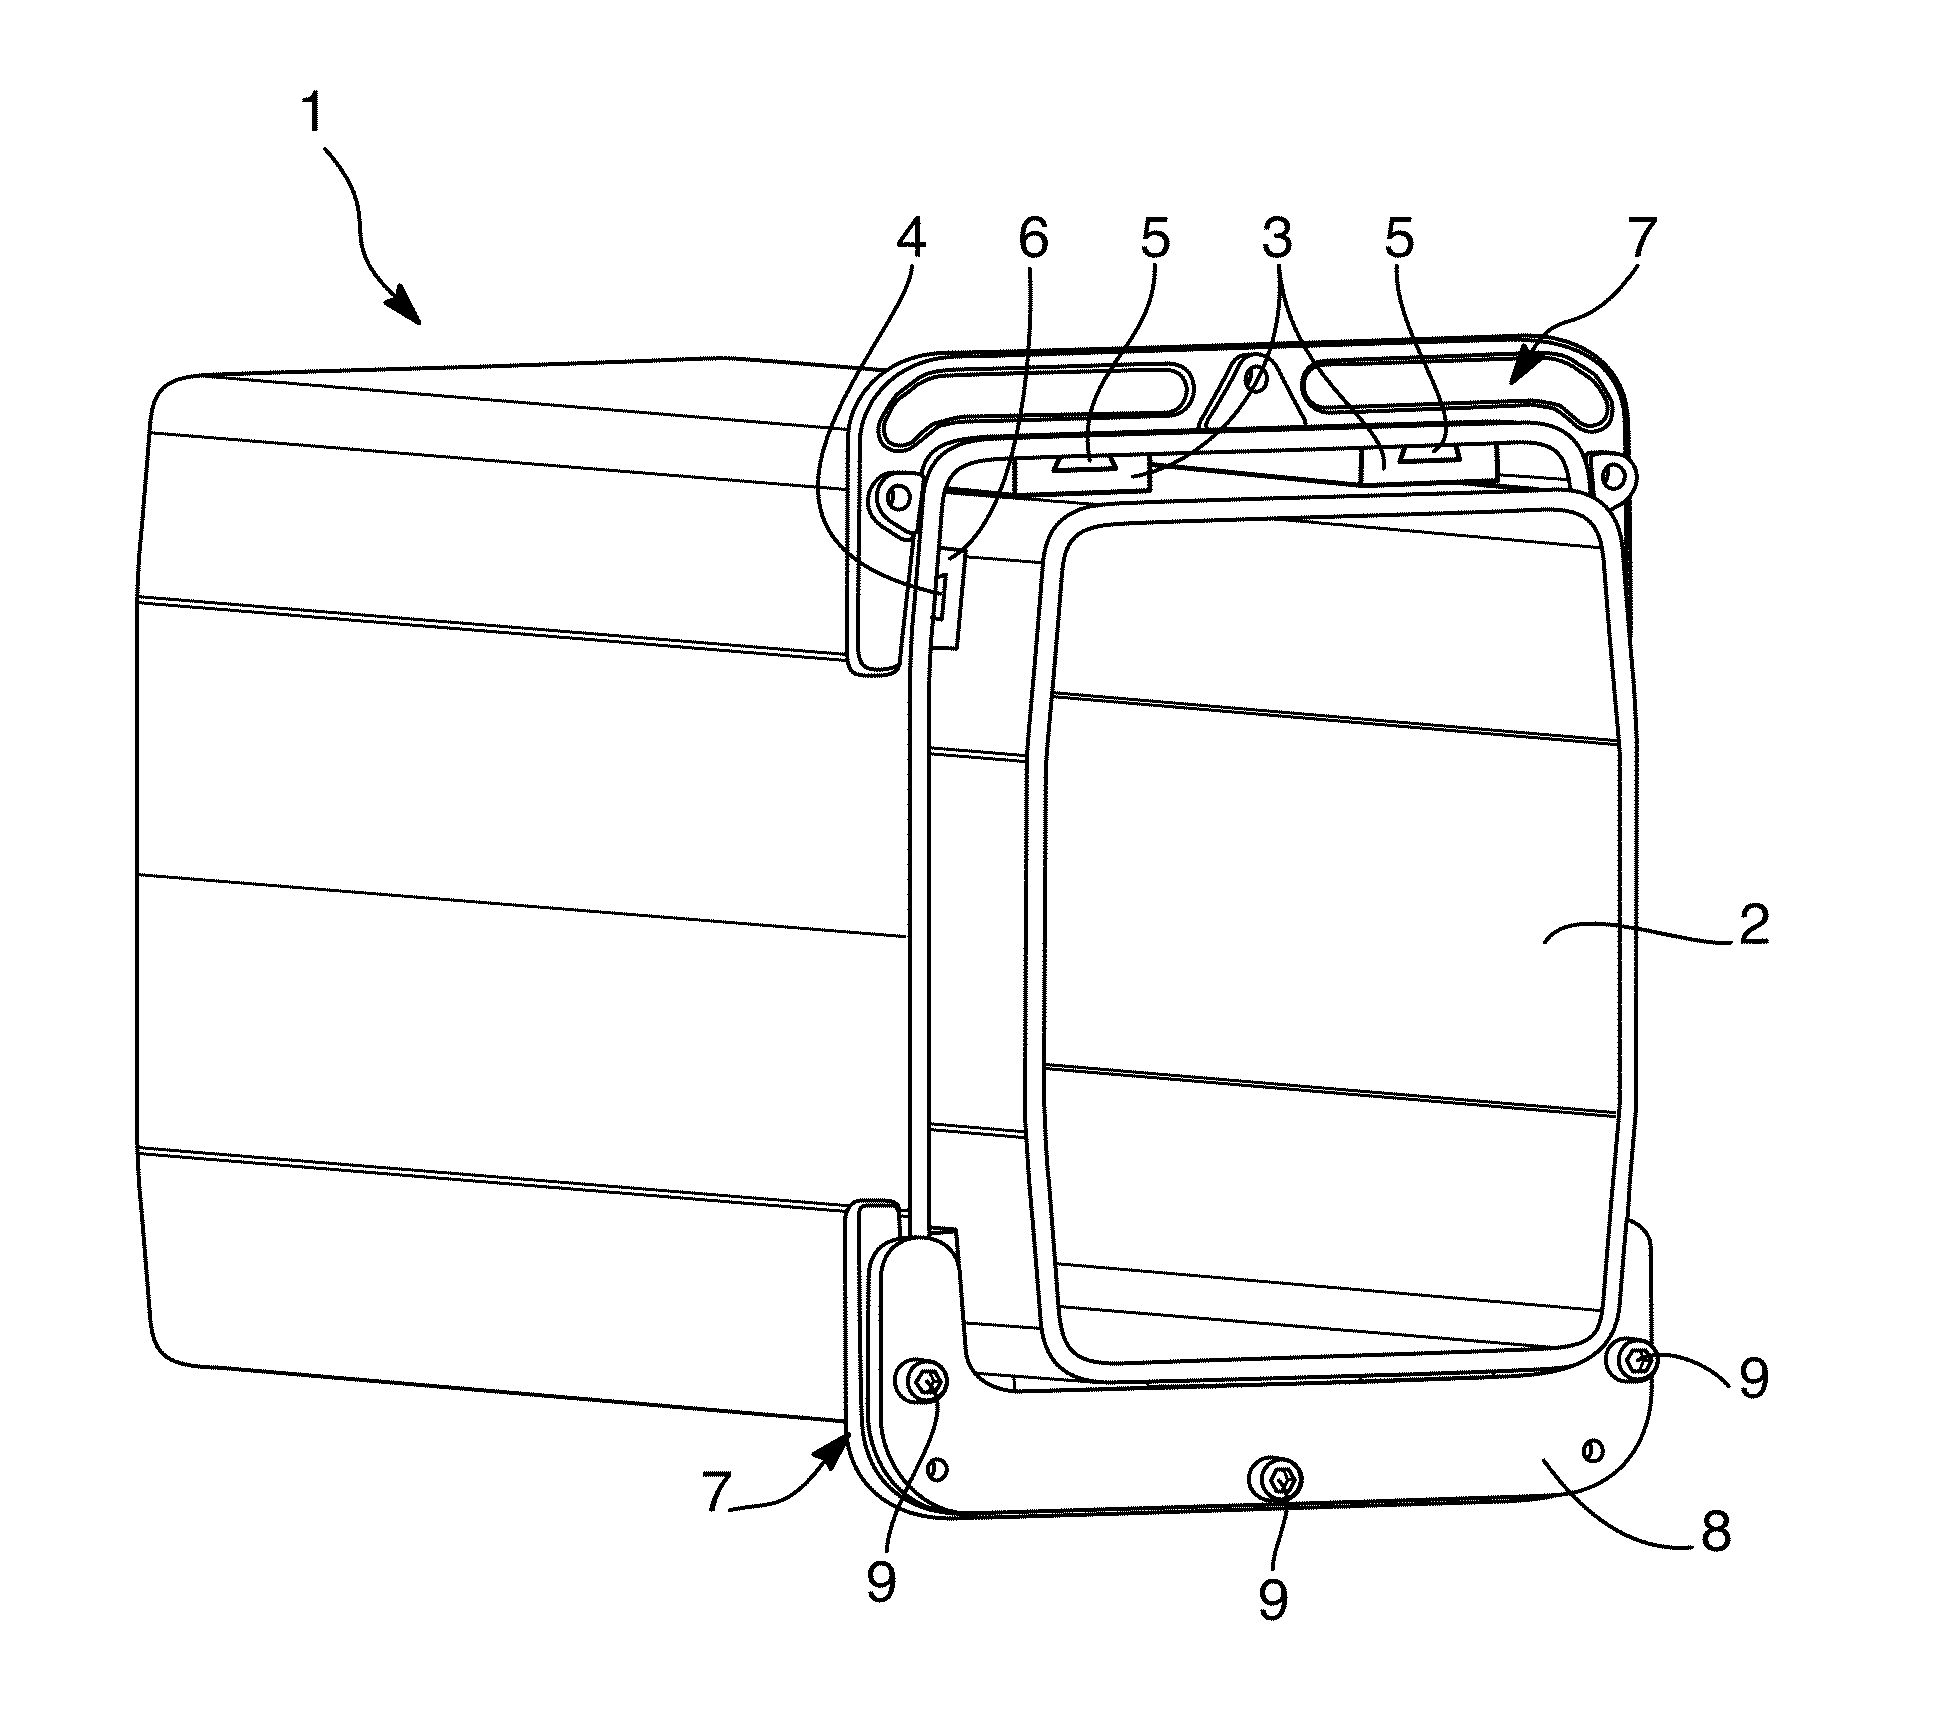 Telescopic handling device comprising at least two elements mounted so as to slide relative to one another